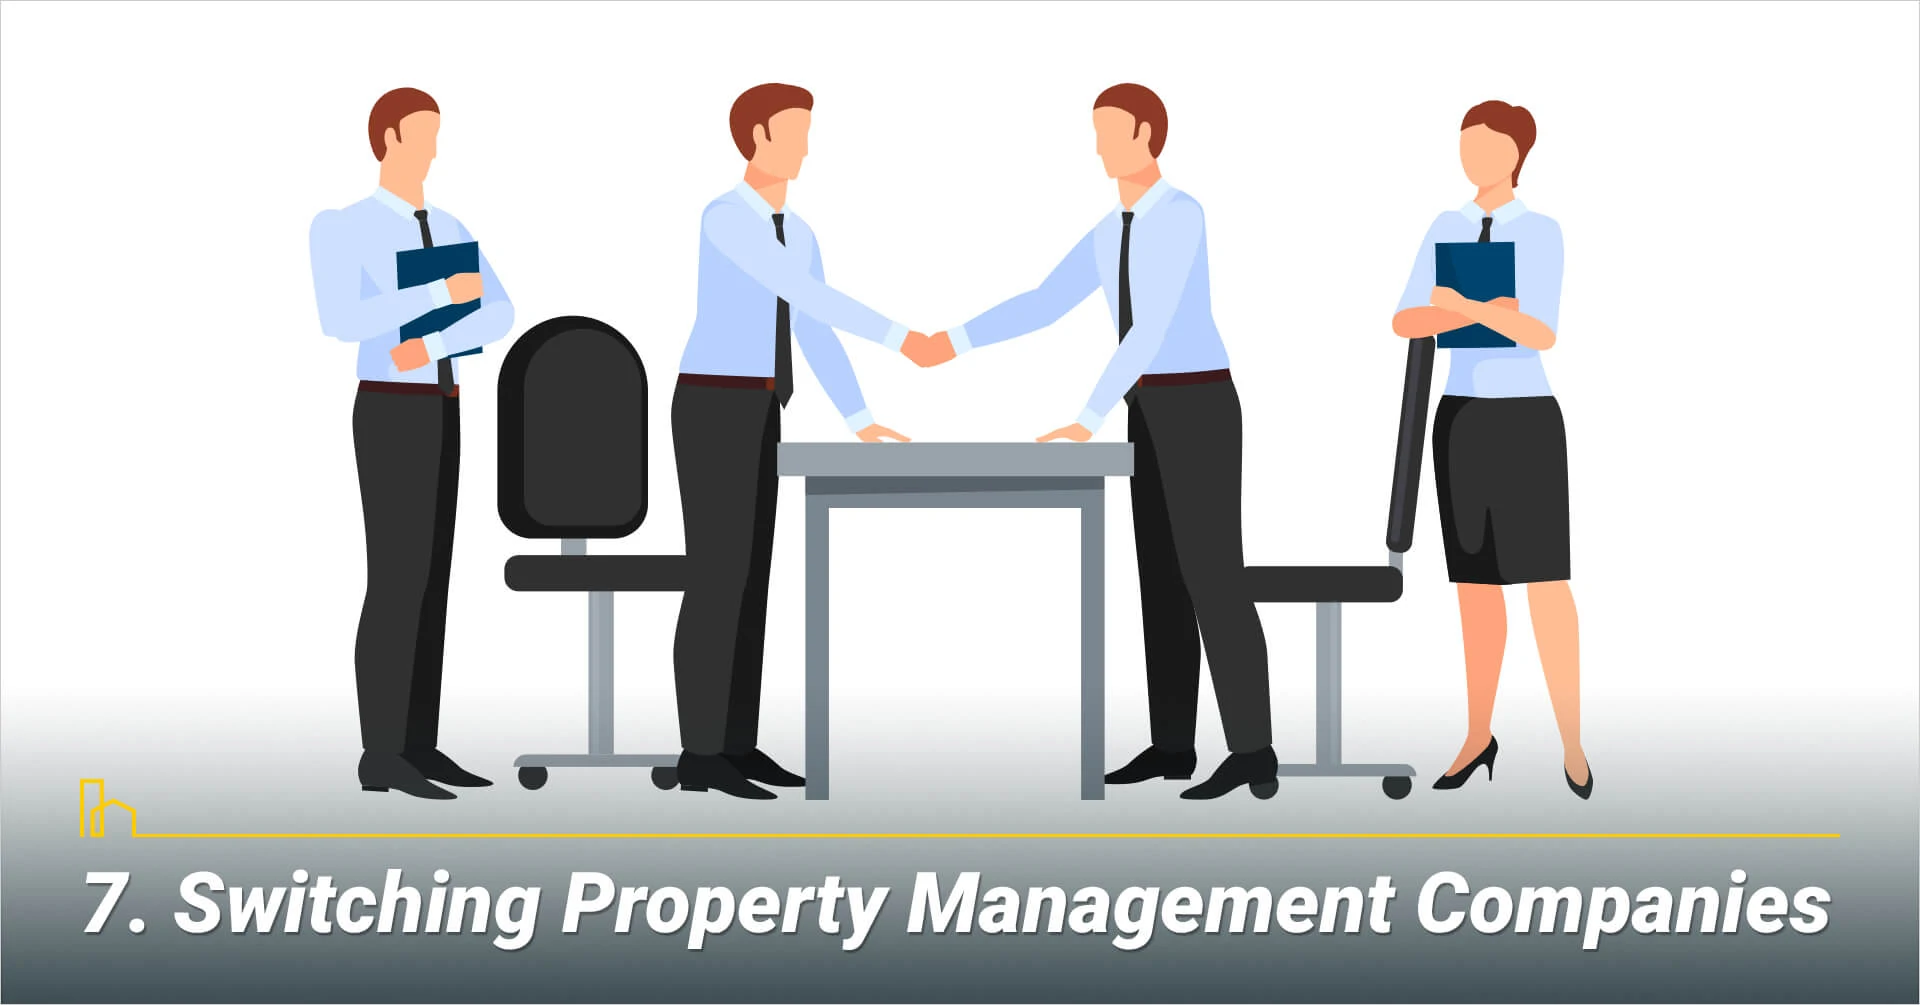 Switching Property Management Companies, have a second thought about the company